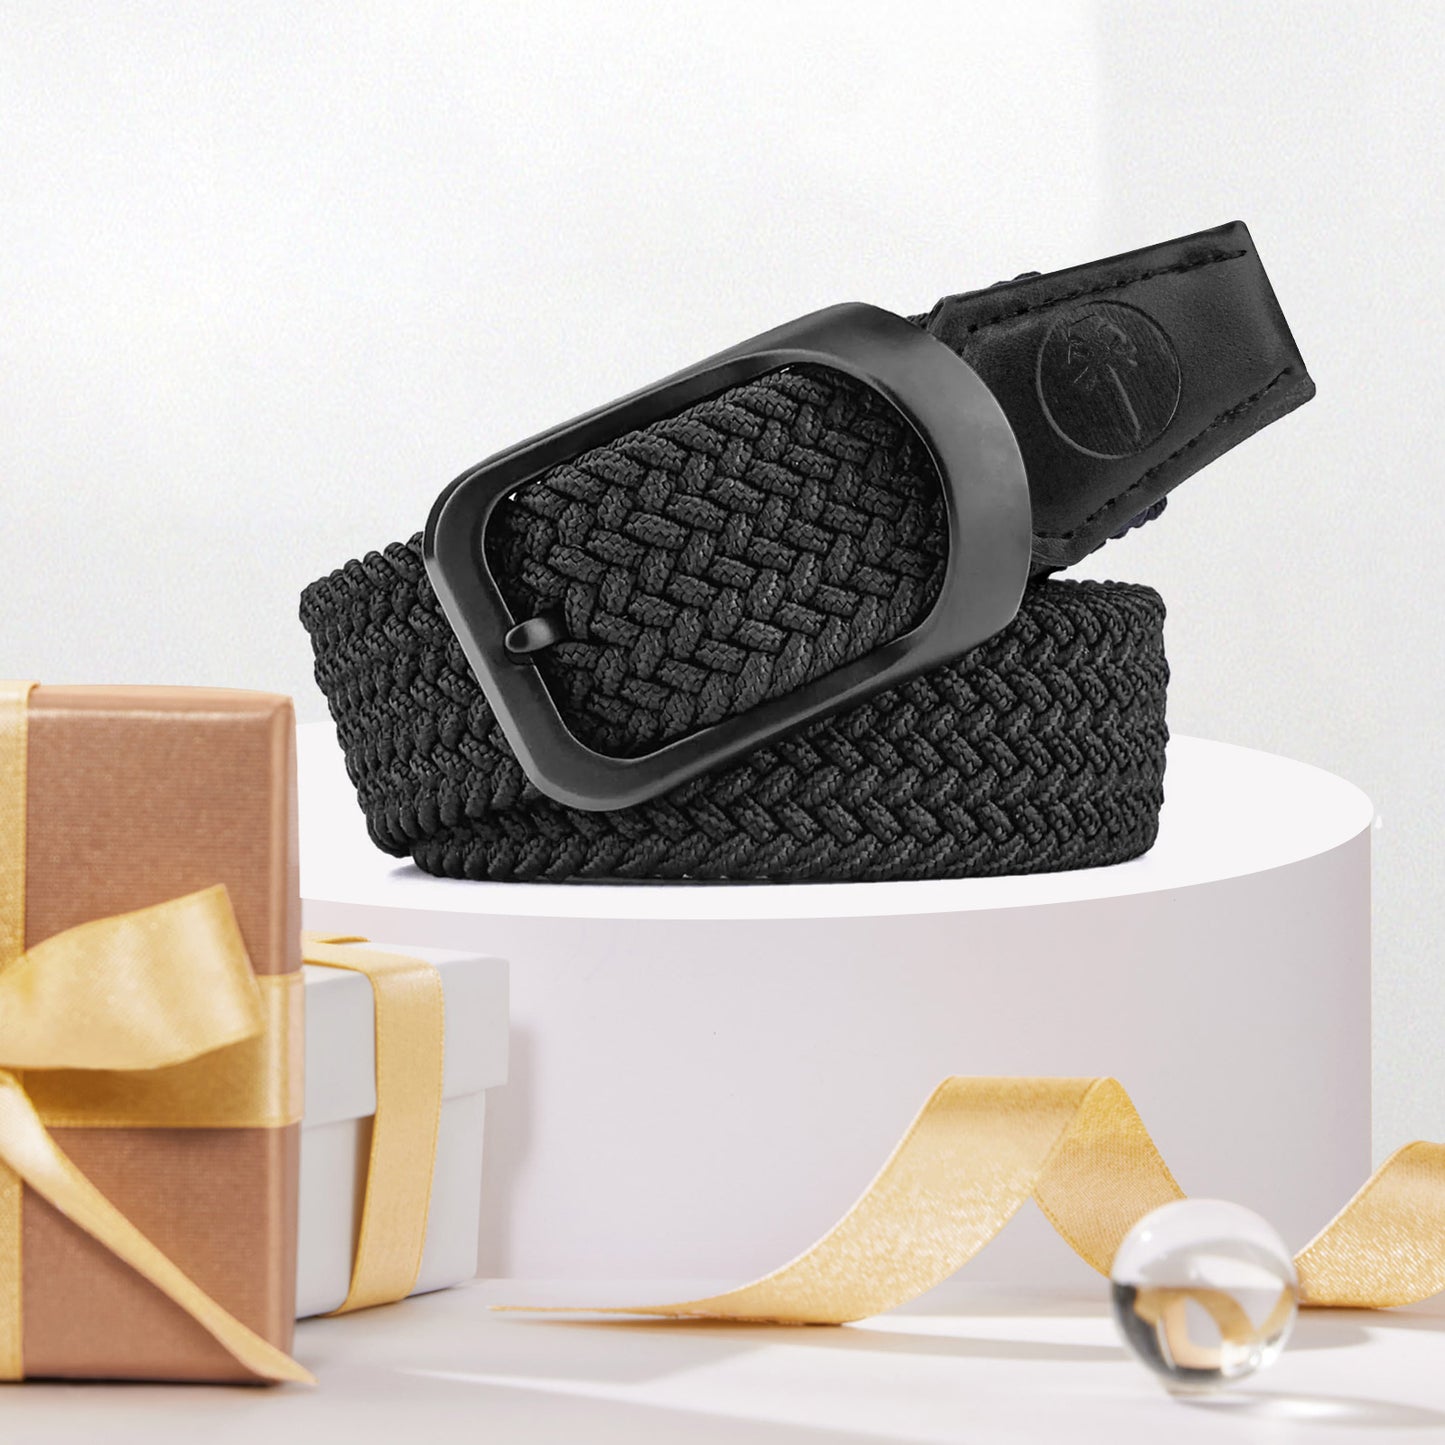 Black Elastic Braided Leather Golf Belt Casual Woven Stretch Belts Free Size For Golf Pants Casual Shorts Jeans